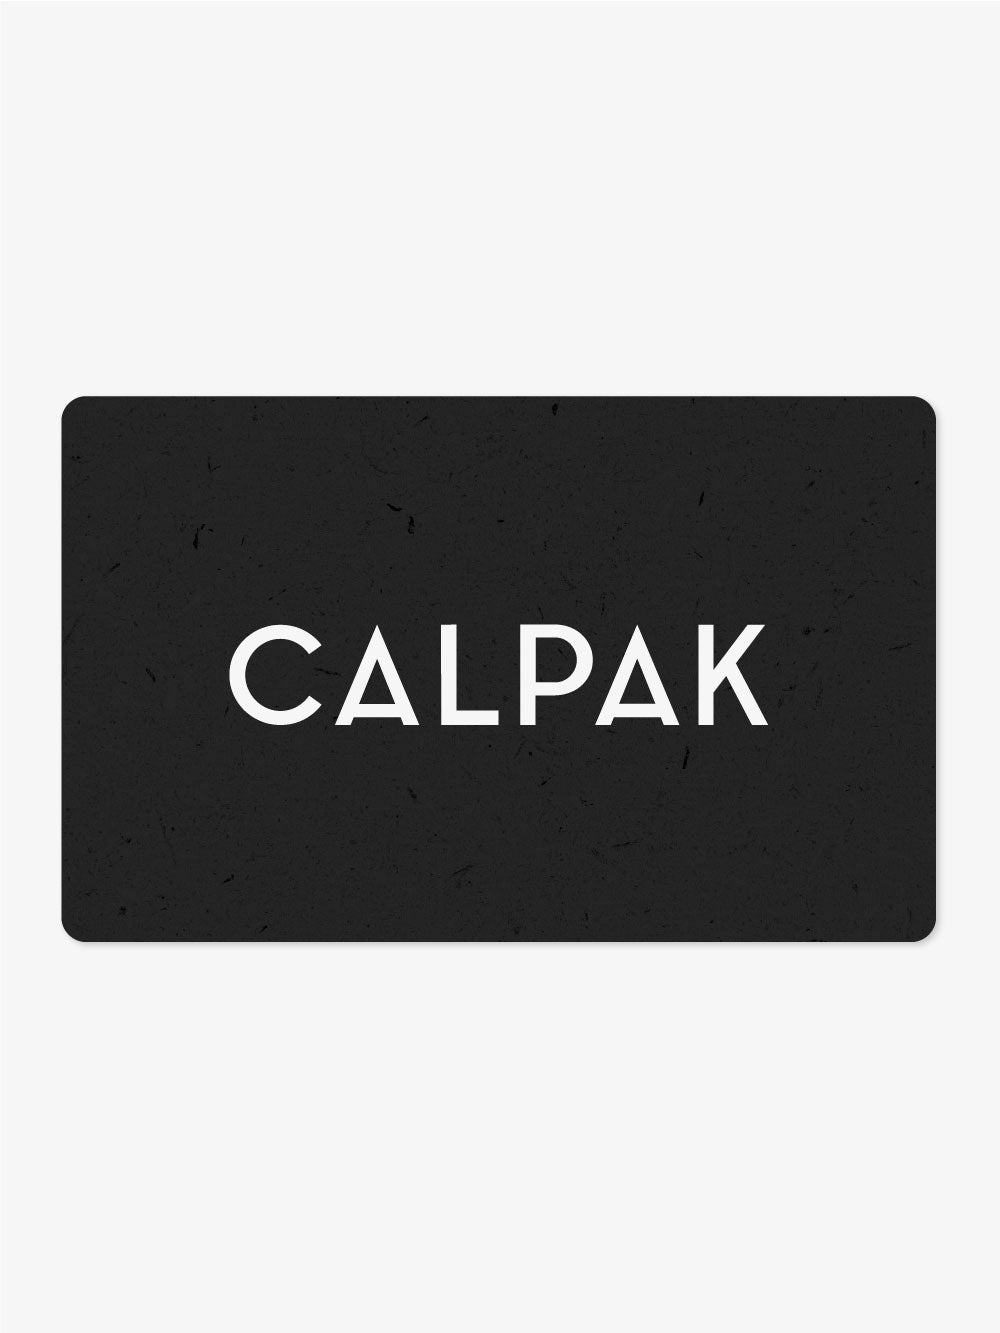 CALPAK digital gift card for luggage, bags and travel accessories;